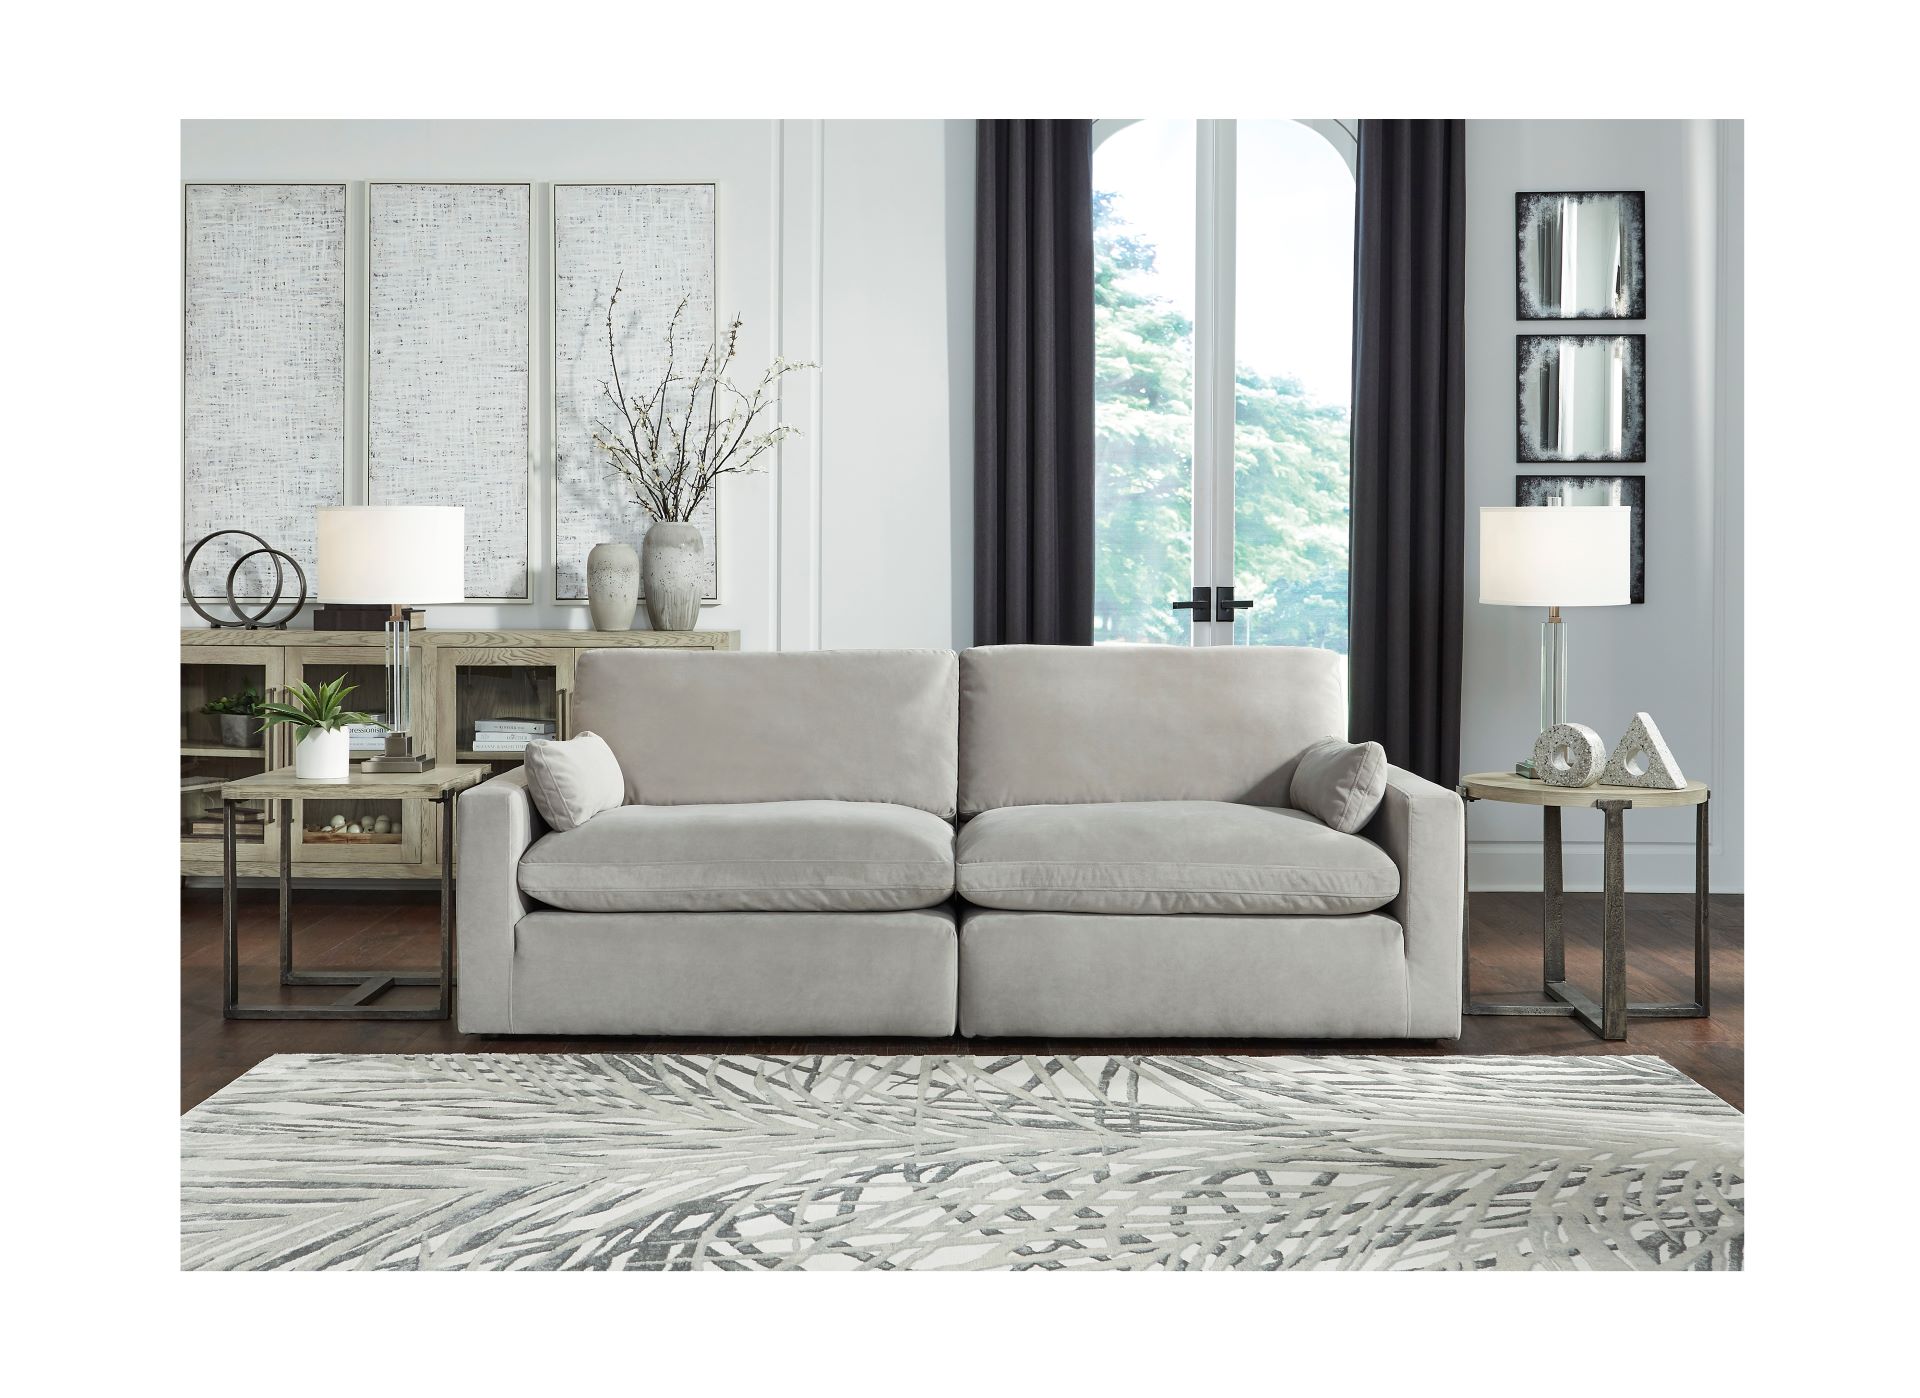 Sophie 2-Piece Sectional sofa